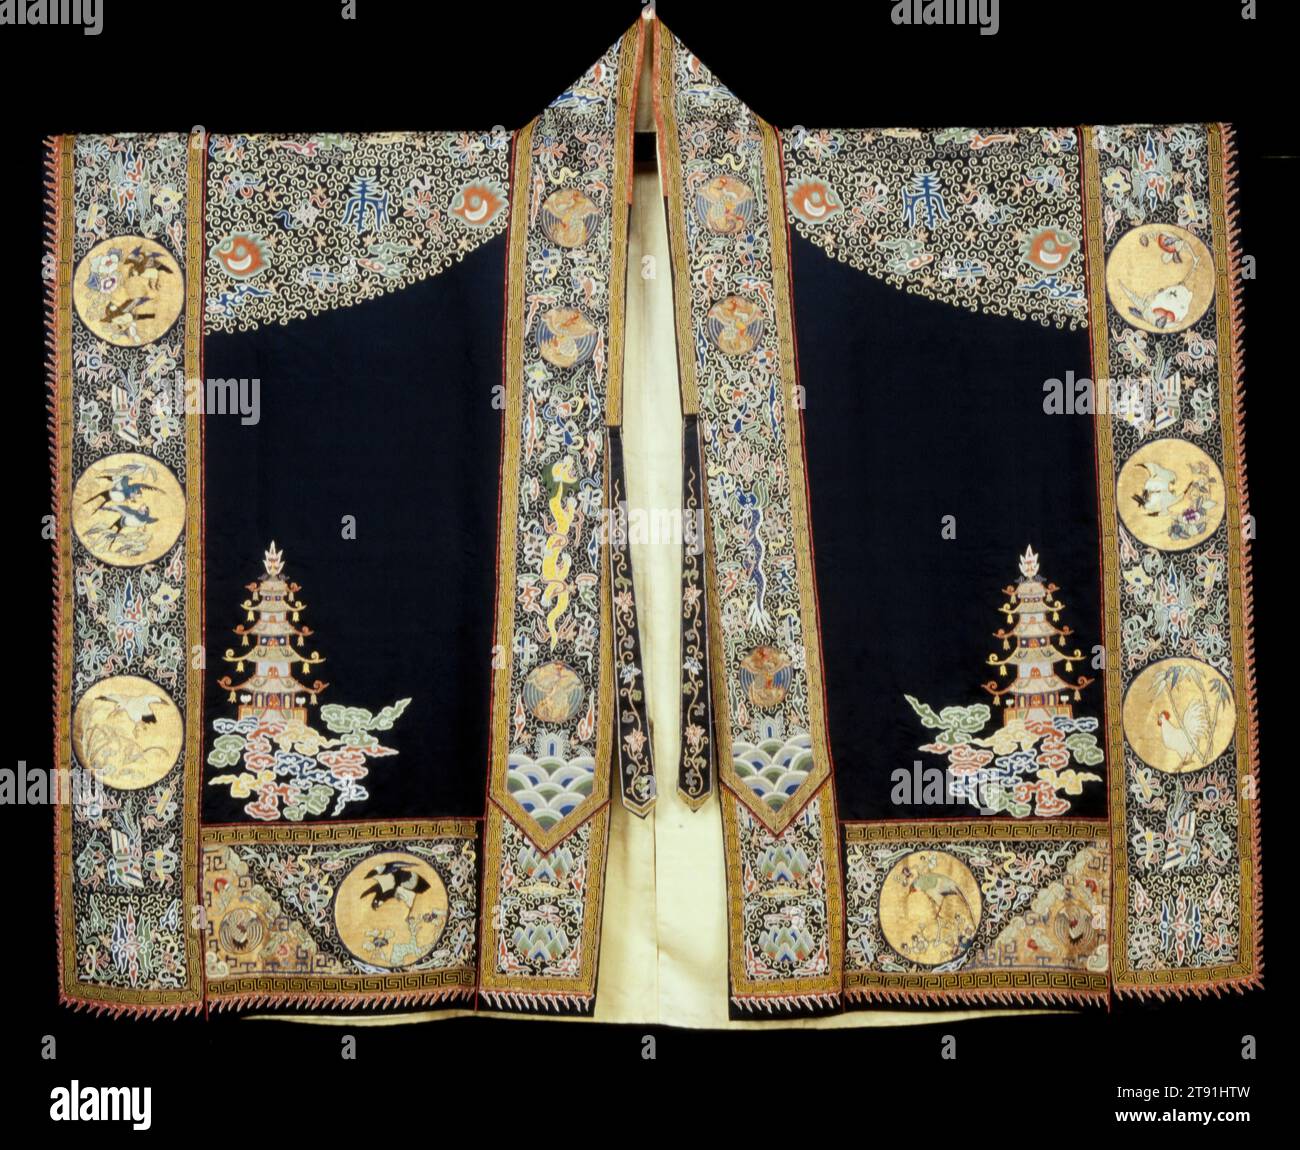 Daoist priest’s robe (jiangyi), Kangxi Period, 1662-1722, L.58-5/8 x W.51-5/8 in., silk, China, 17th-18th century, The 'cosmic diagram' on the back of this robe is surrounded by six gold medallions with figures of the Eight Immortals (legendary beings), a qilin (an imaginary animal), and a bear. Interspersed among them are red symbols representing three of Daoism’s five sacred mountains Stock Photo